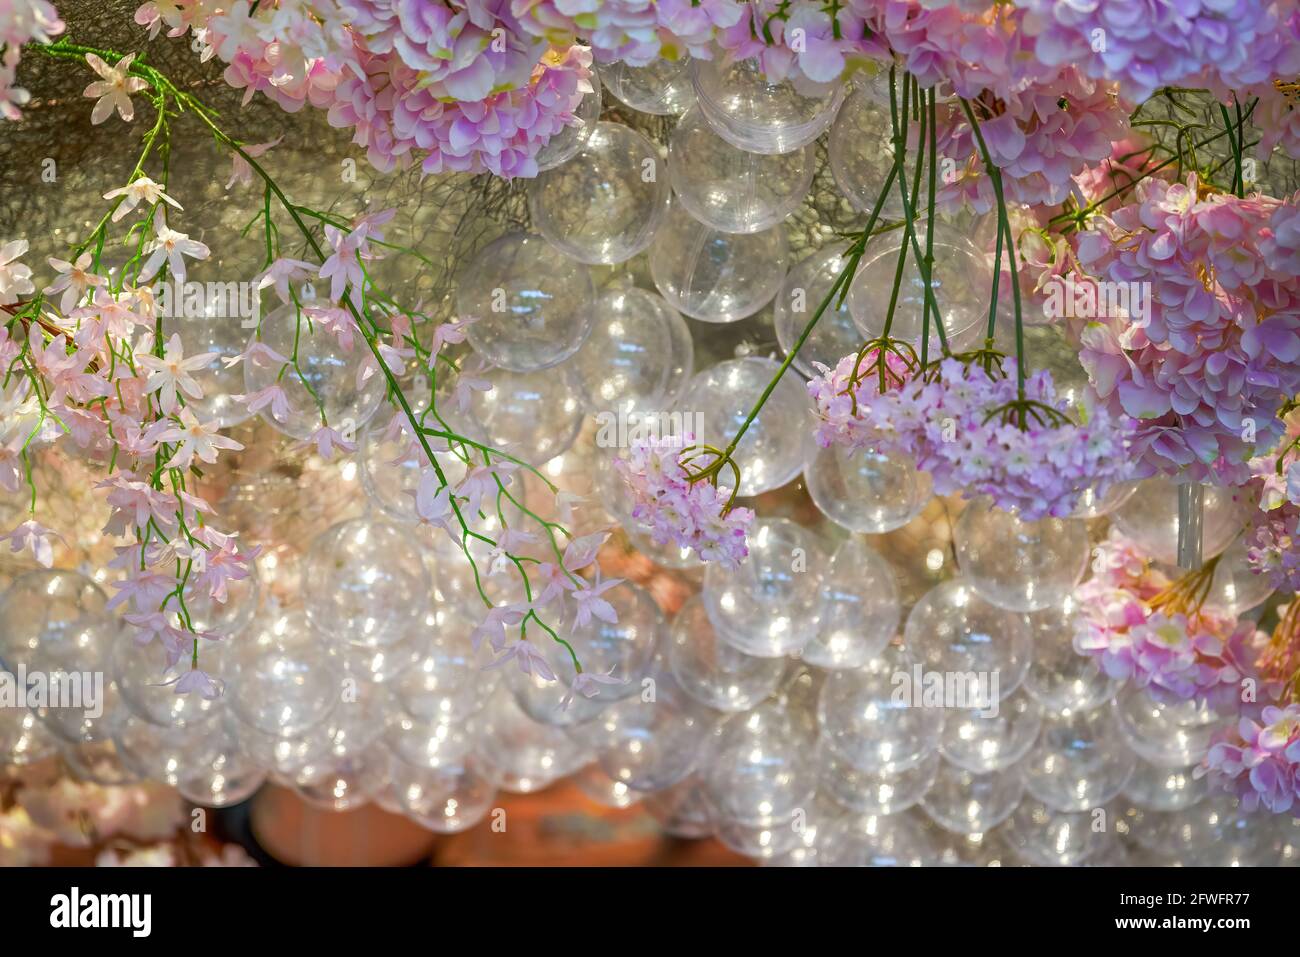 Modern wedding scene with balloon bubbles and purple ceiling flowers Stock Photo